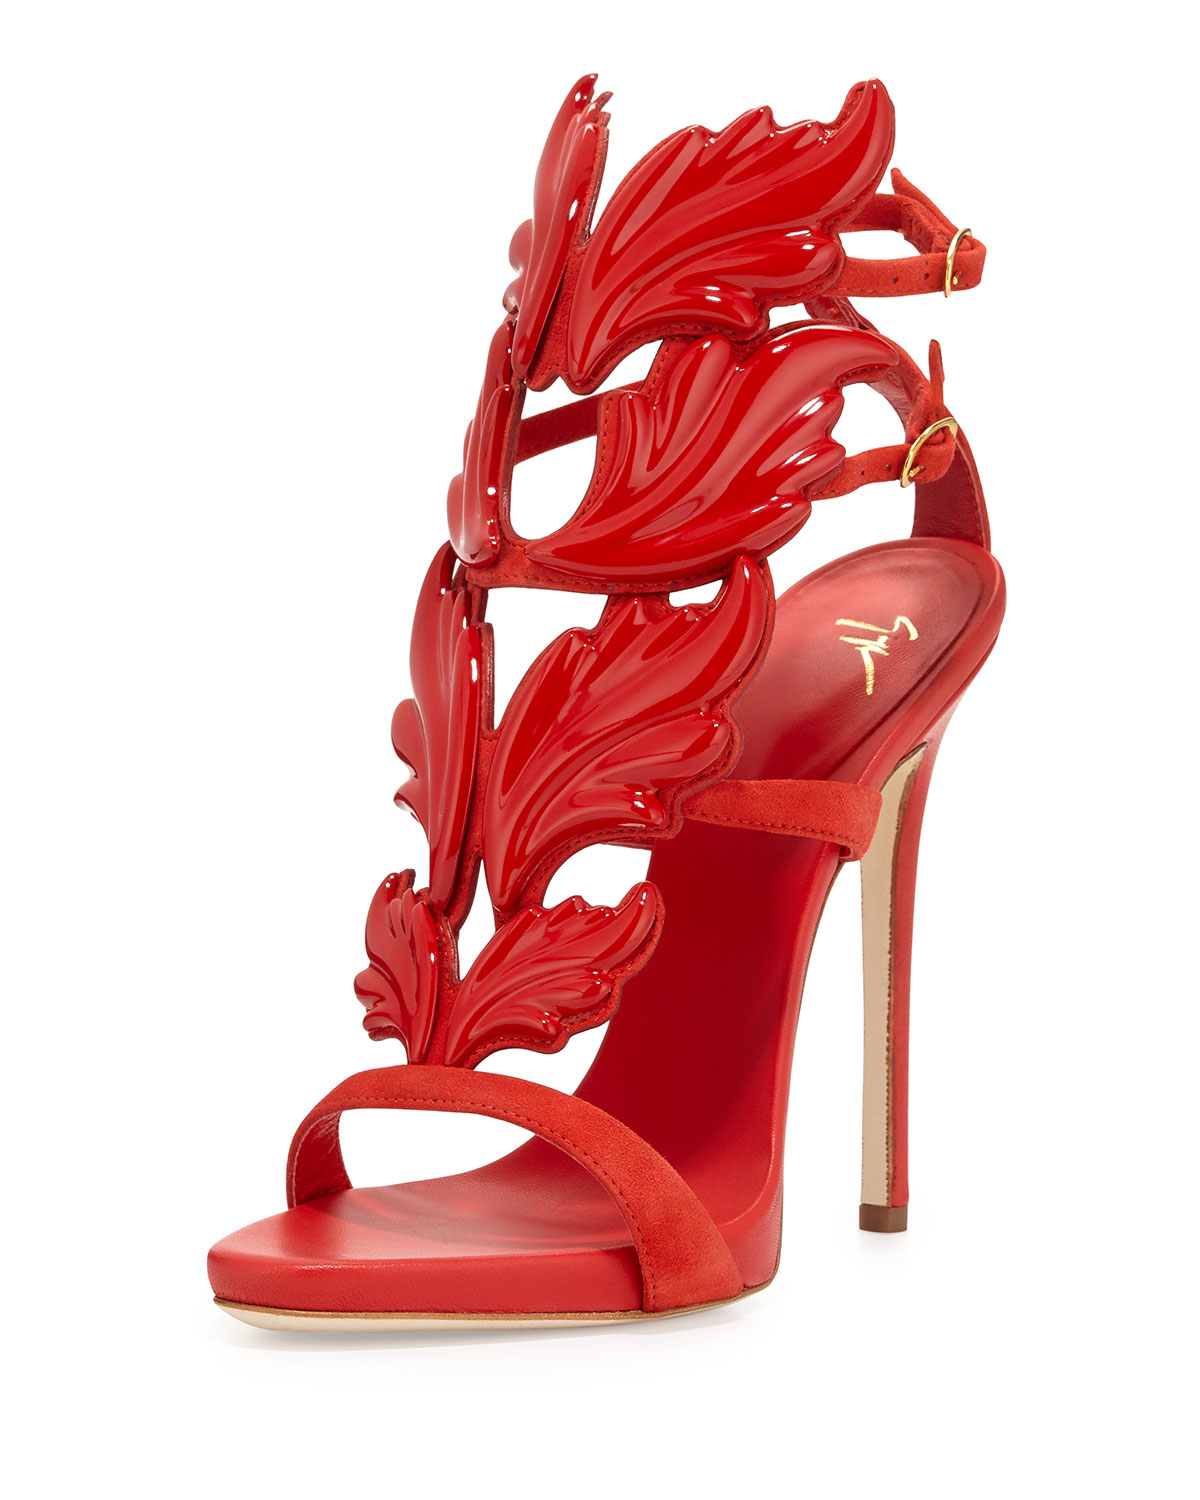 Giuseppe zanotti Flame Suede High-heel Sandal in Red | Lyst